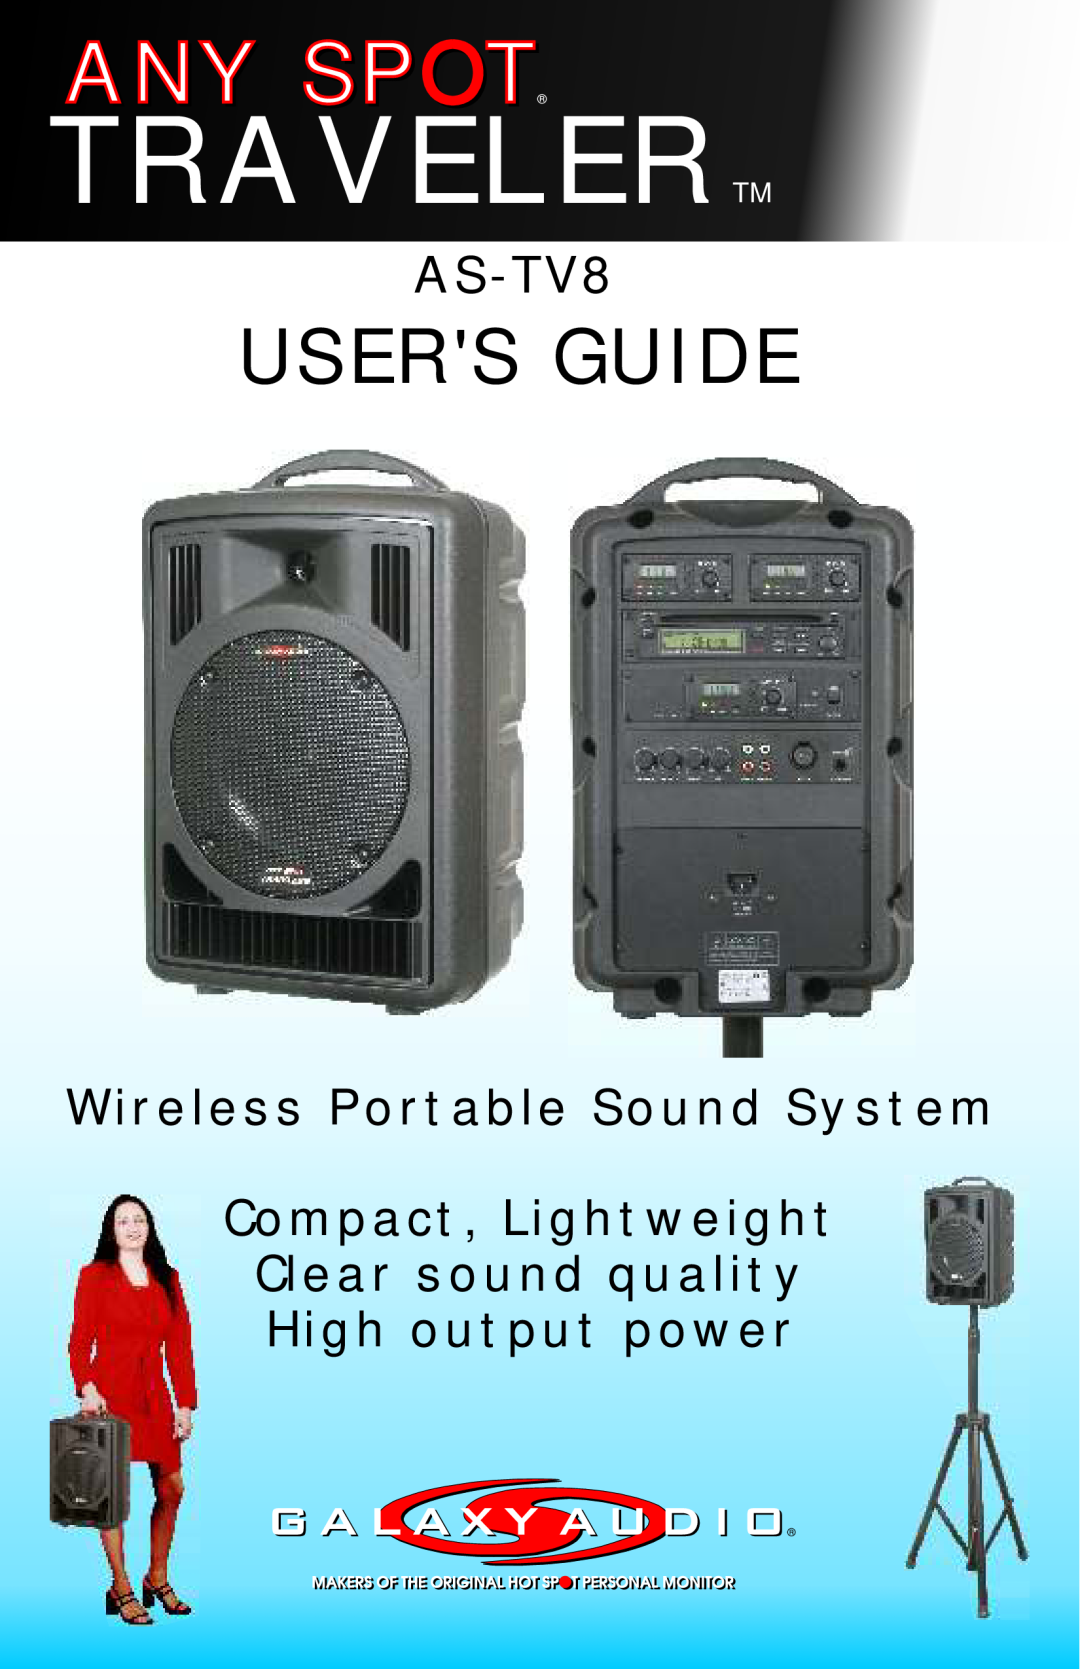 Traveler AS-TV8 manual Wireless Portable Sound System, Compact, Lightweight Clear sound quality, High output power 